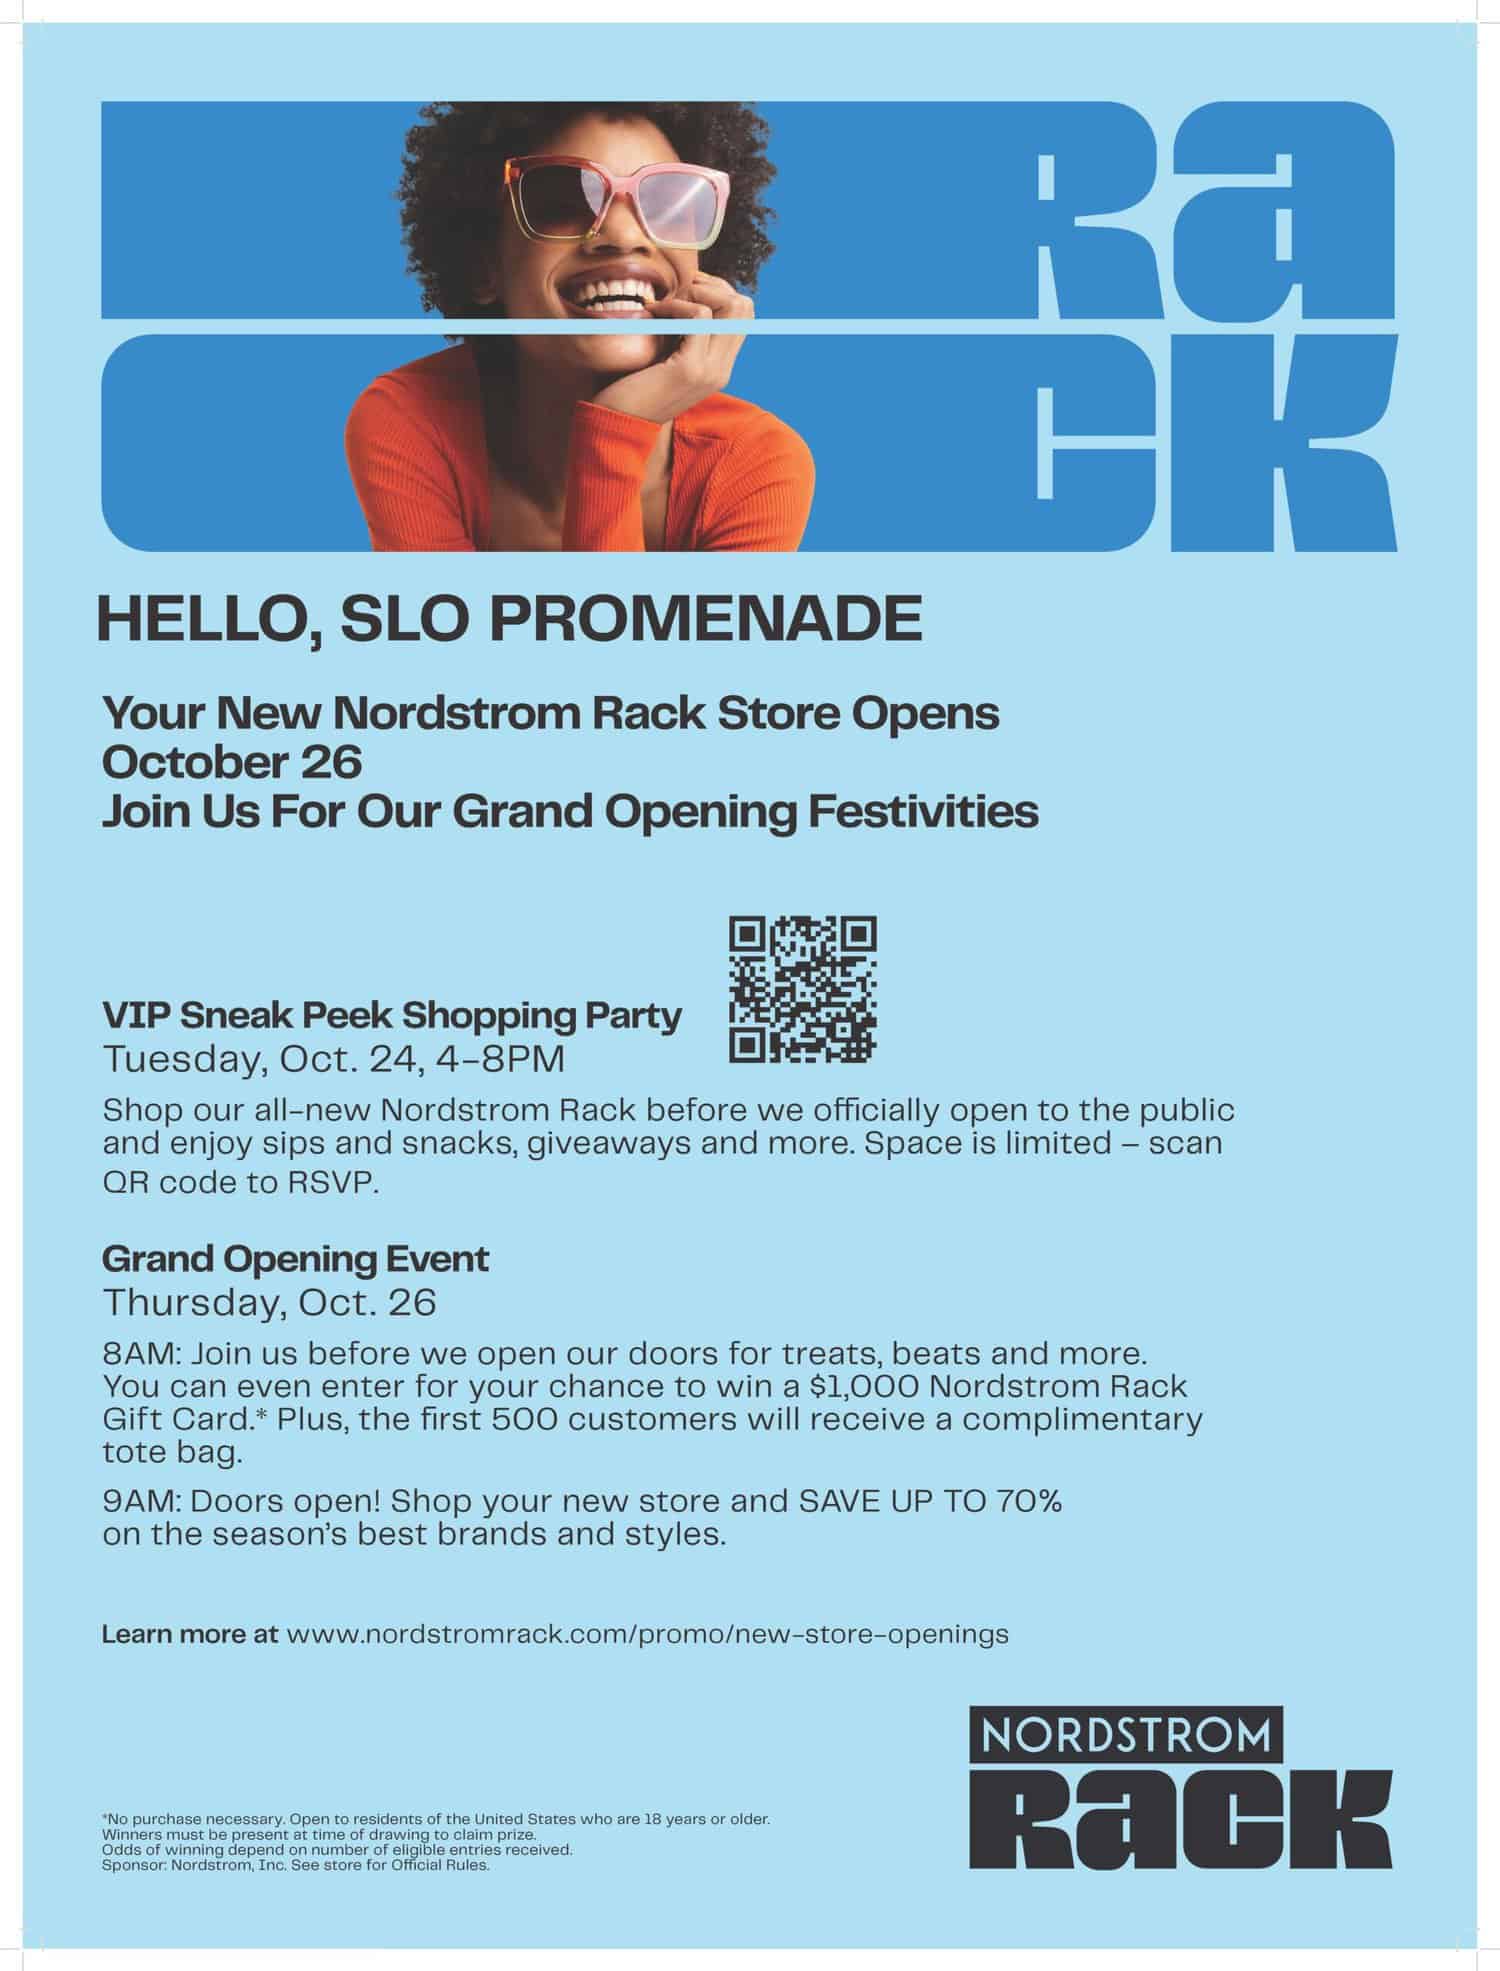 Pictures: Nordstrom Rack store opens at SLO Promenade